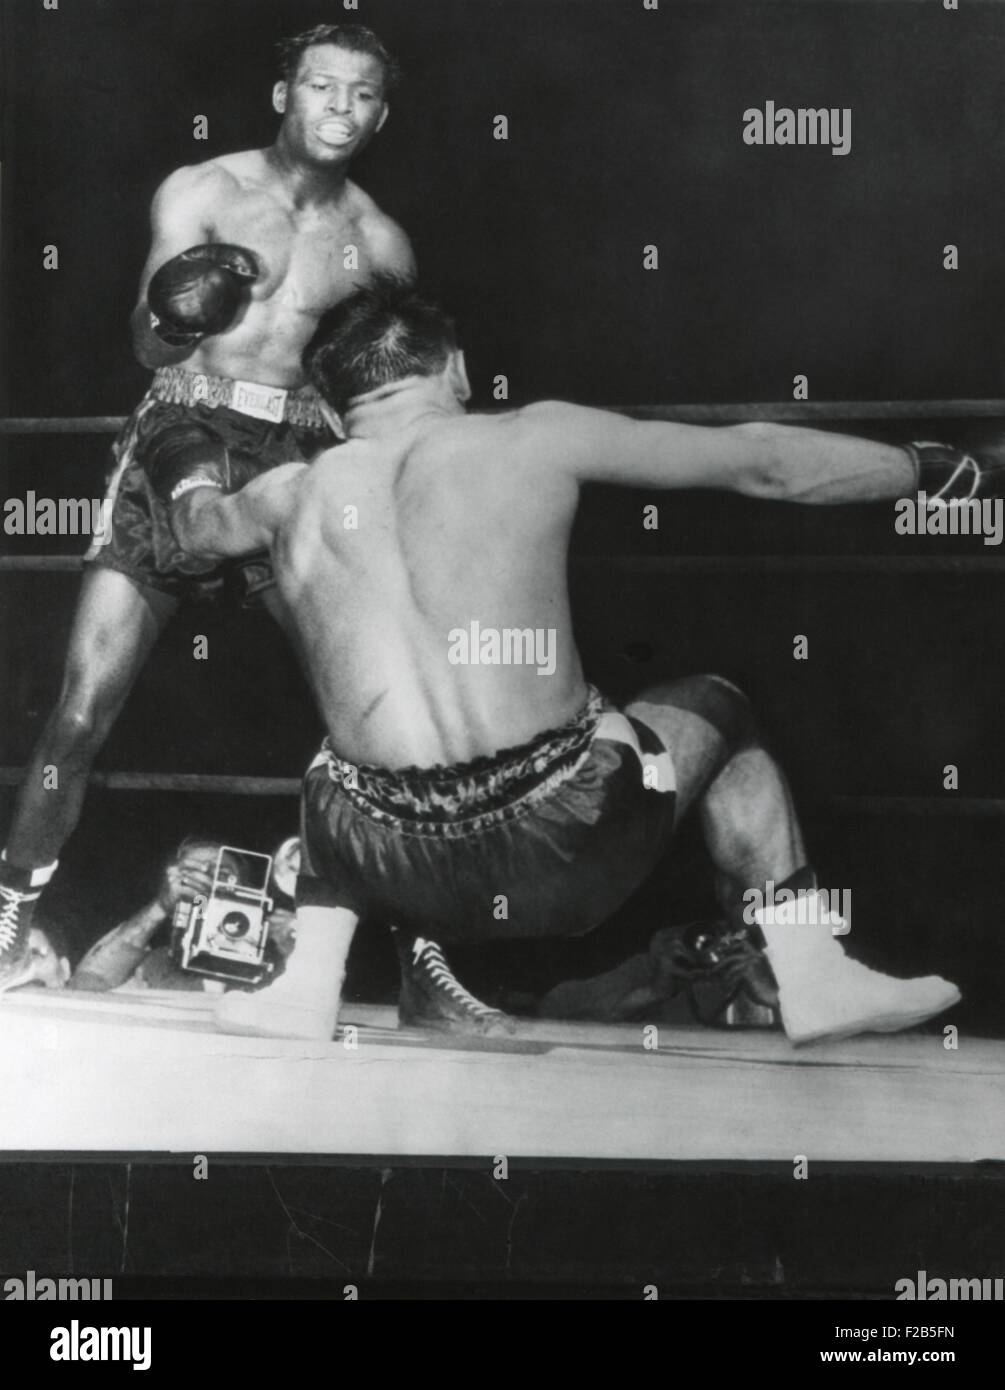 Sugar Ray Robinson: Dancing Violence — THE FIGHT SITE